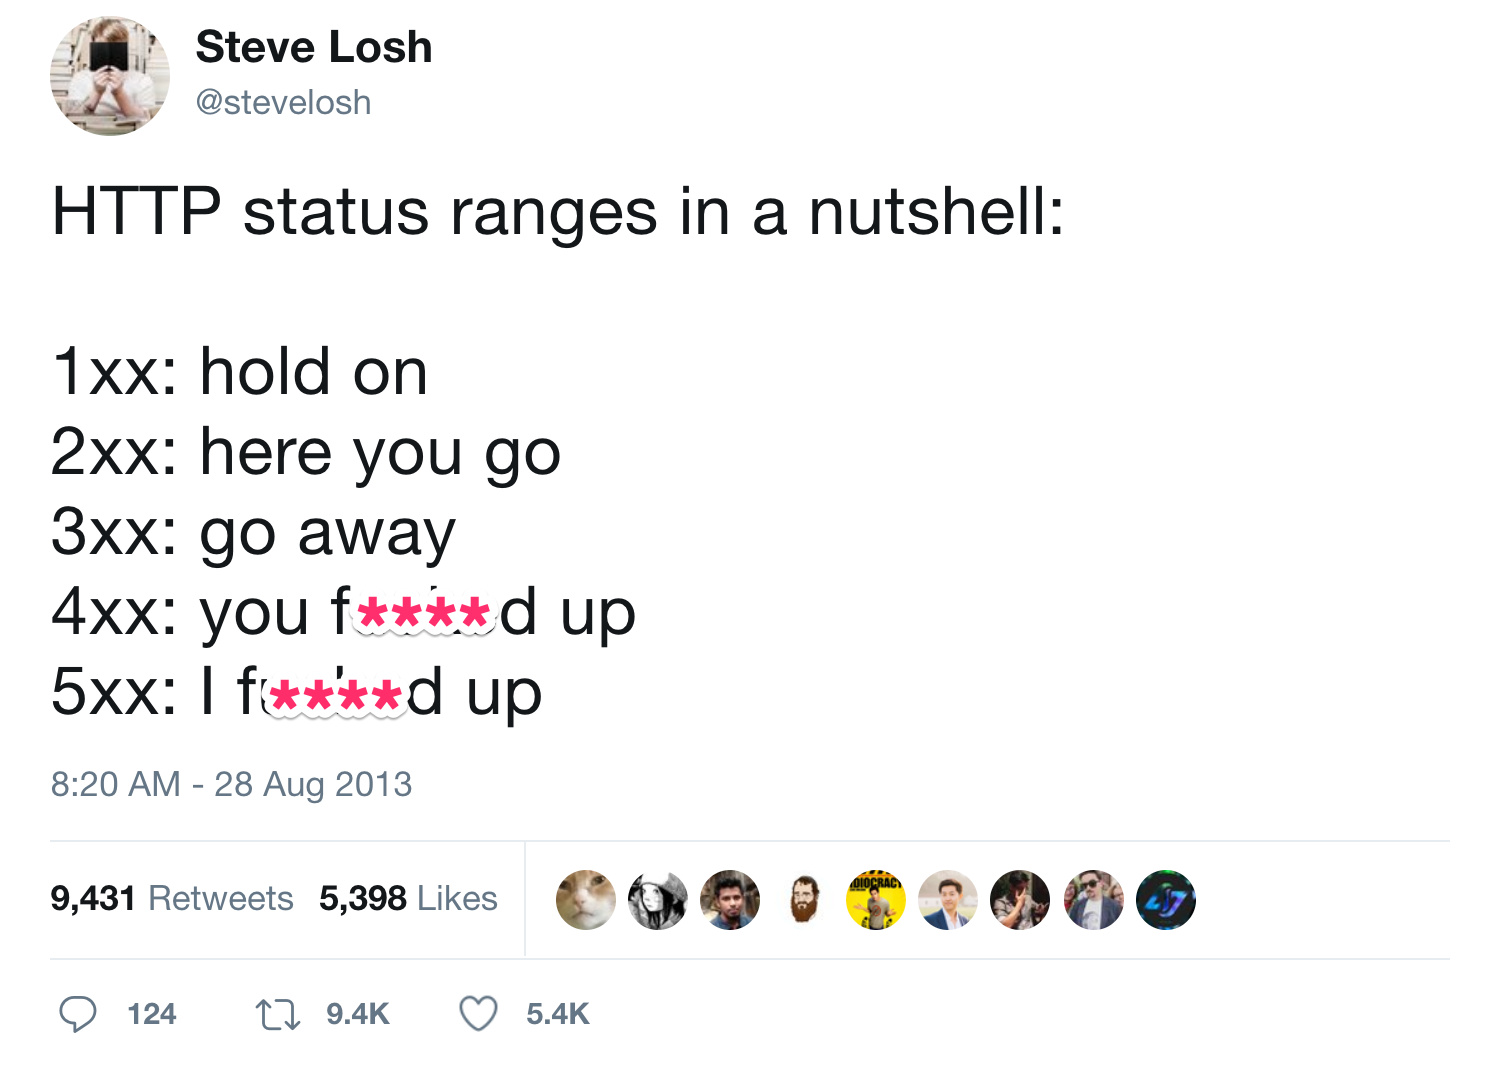 Steve_Losh_on_Twitter___HTTP_status_ranges_in_a_nutshell__1xx__hold_on_2xx__here_you_go_3xx__go_away_4xx__you_fucked_up_5xx__I_fucked_up_